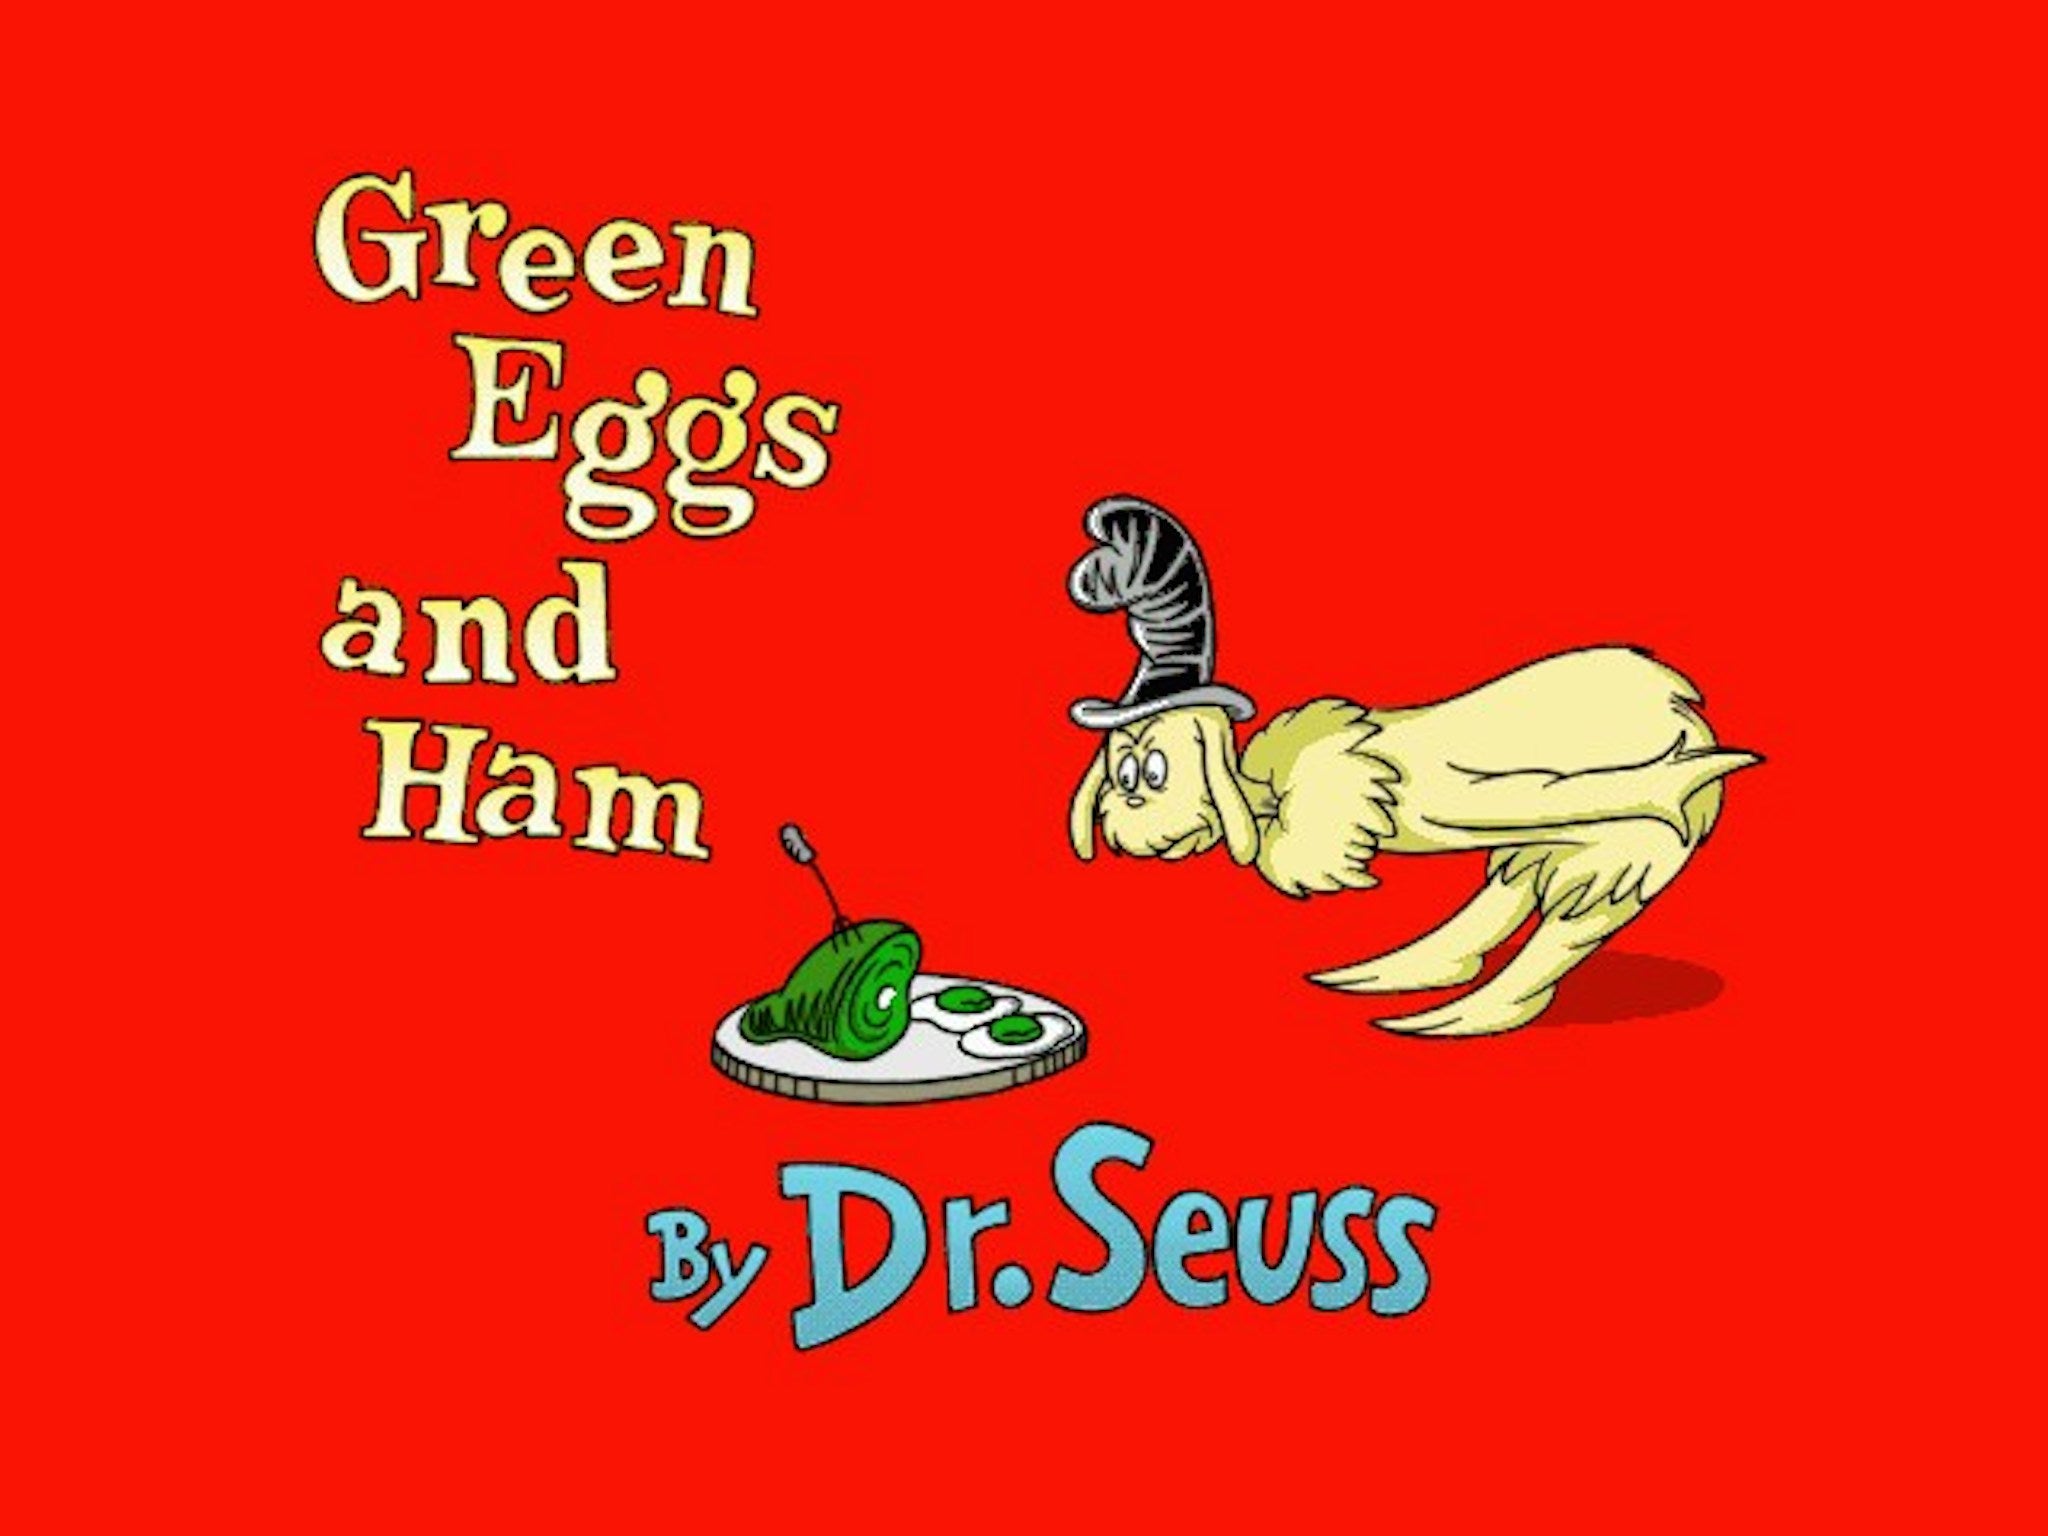 Green Eggs and Ham is coming to Netflix in 2018